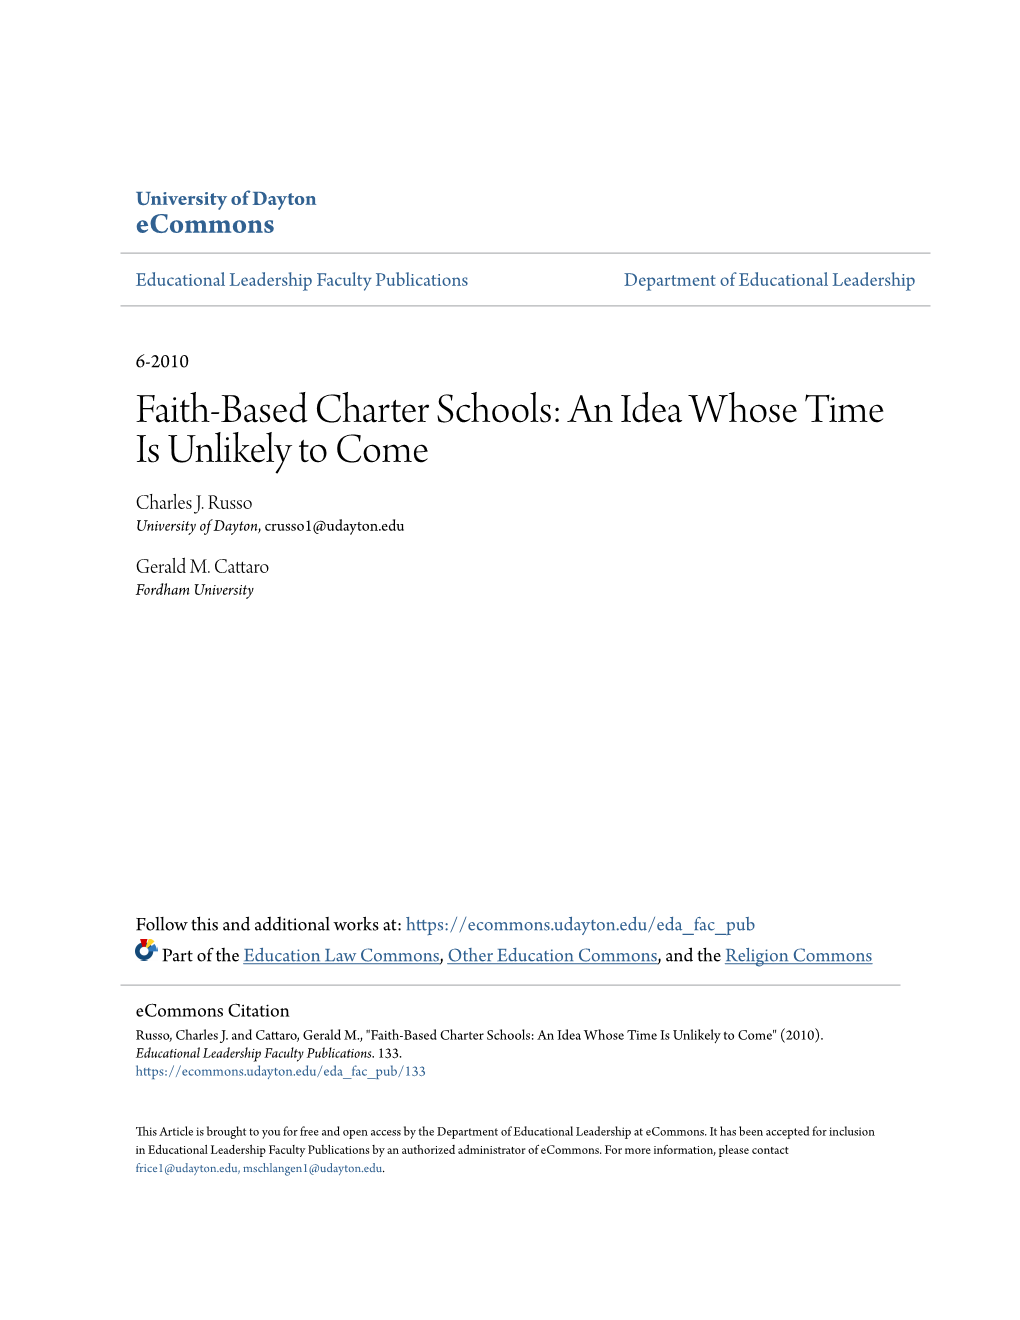 Faith-Based Charter Schools: an Idea Whose Time Is Unlikely to Come Charles J